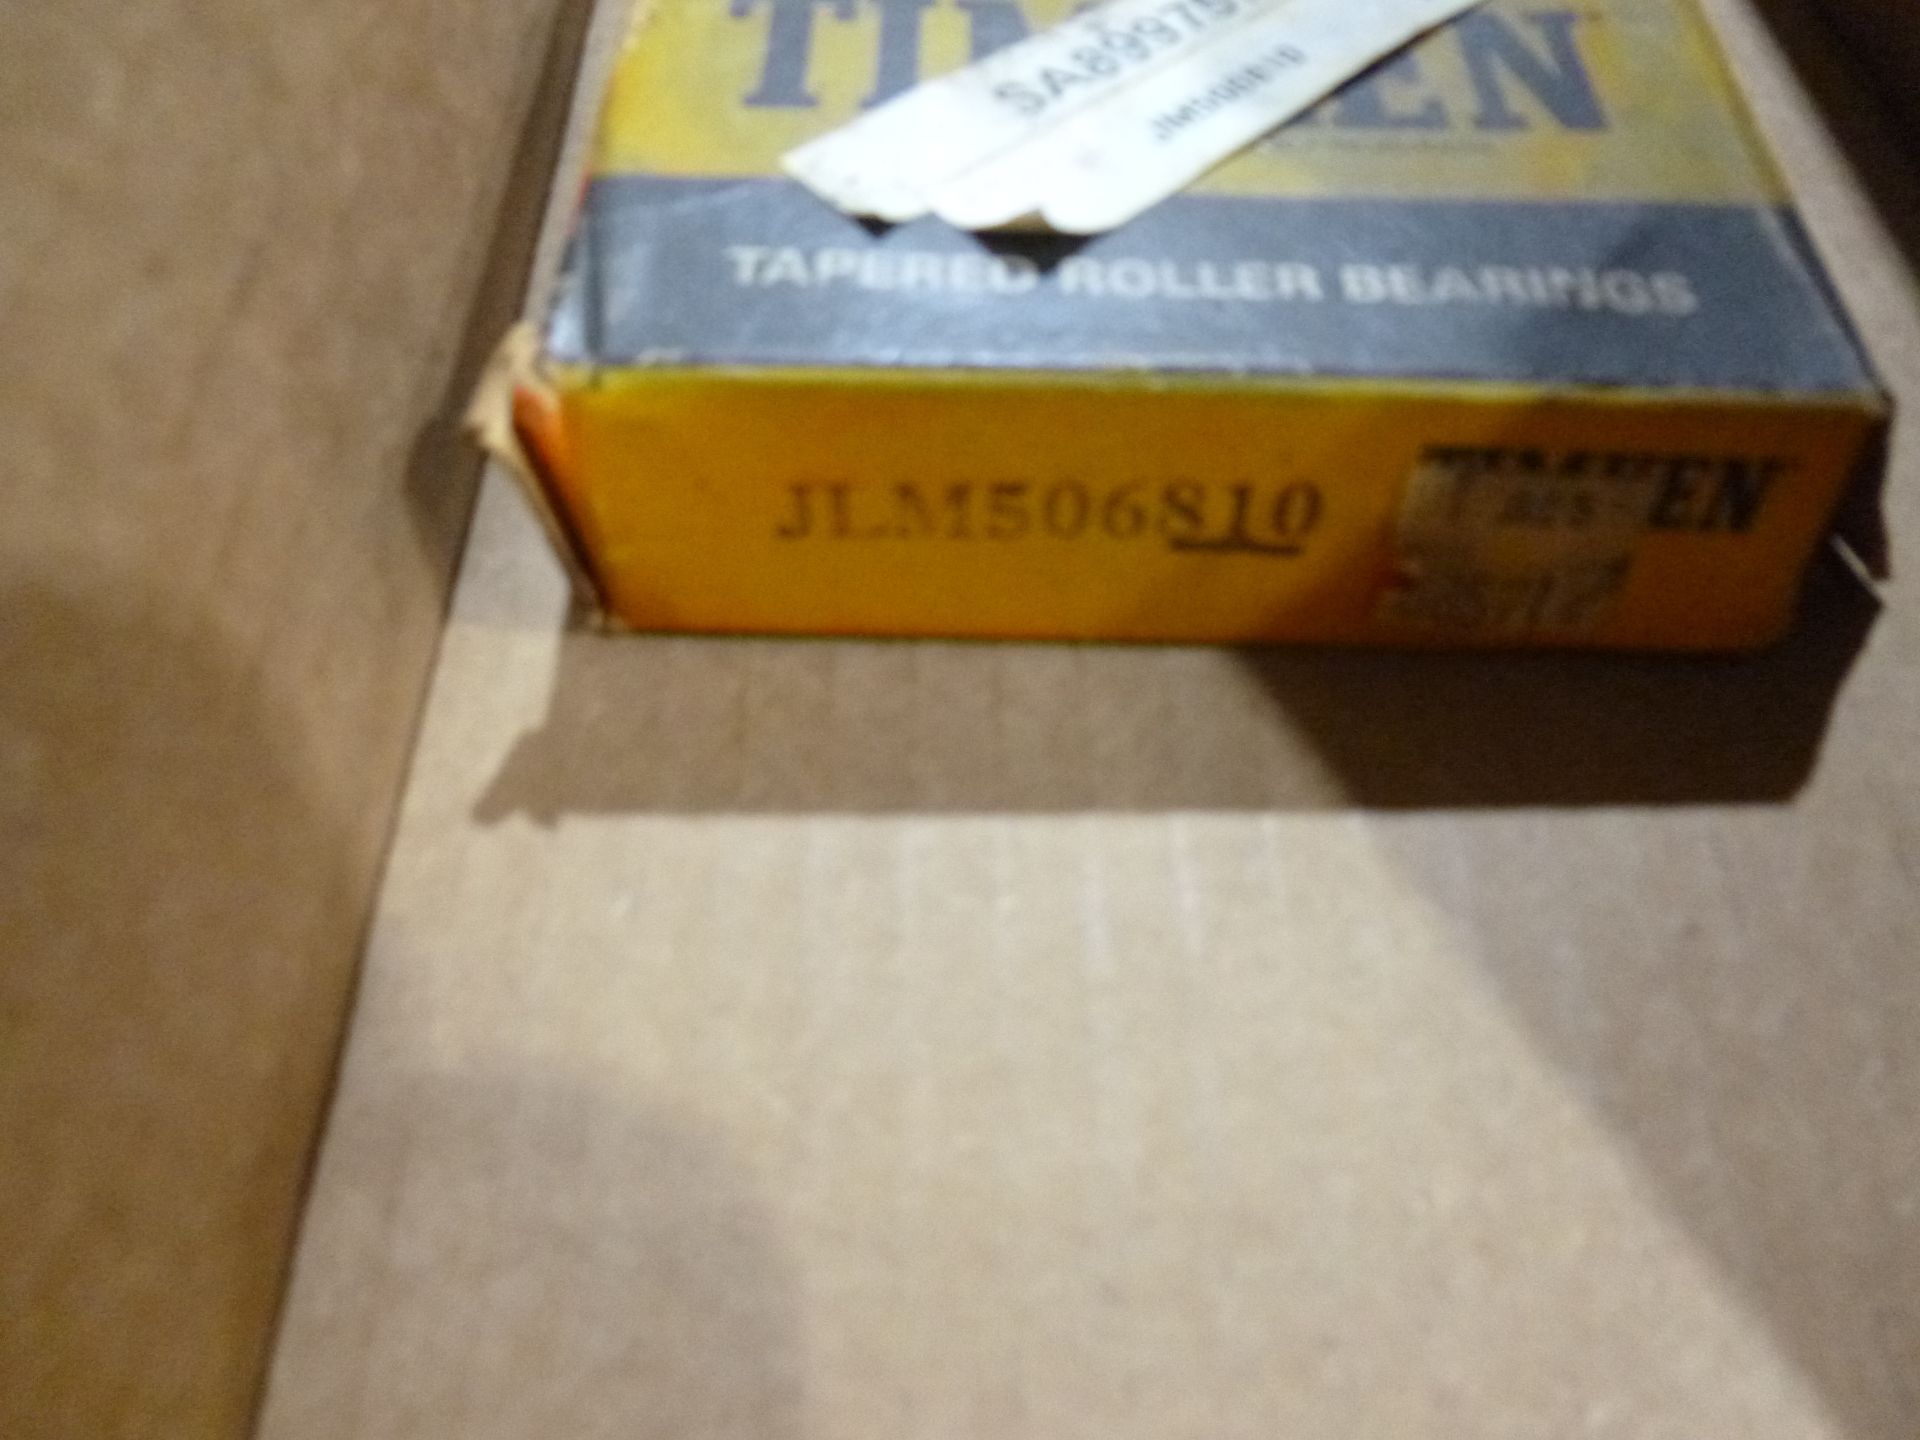 Timken bearing JLM506810, as always with Brolyn LLC auctions, all lots can be picked up from auction - Image 2 of 2